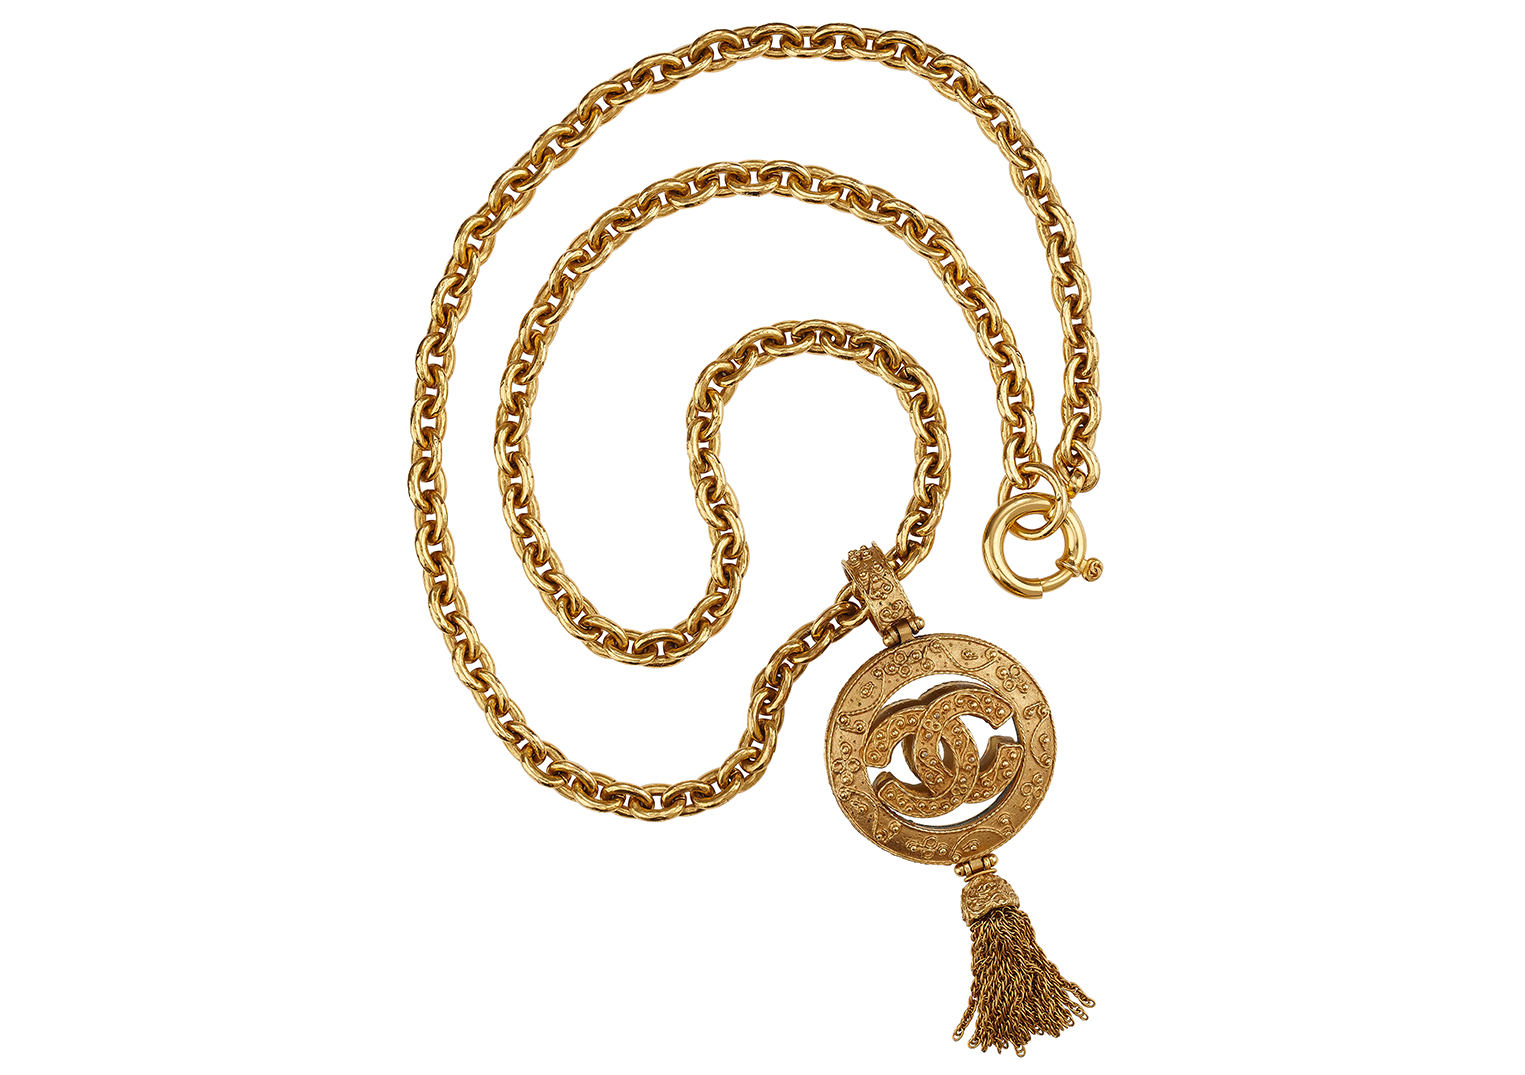 Vintage Chanel 1994 Long Gold Chain Necklace with Mirror Tassel